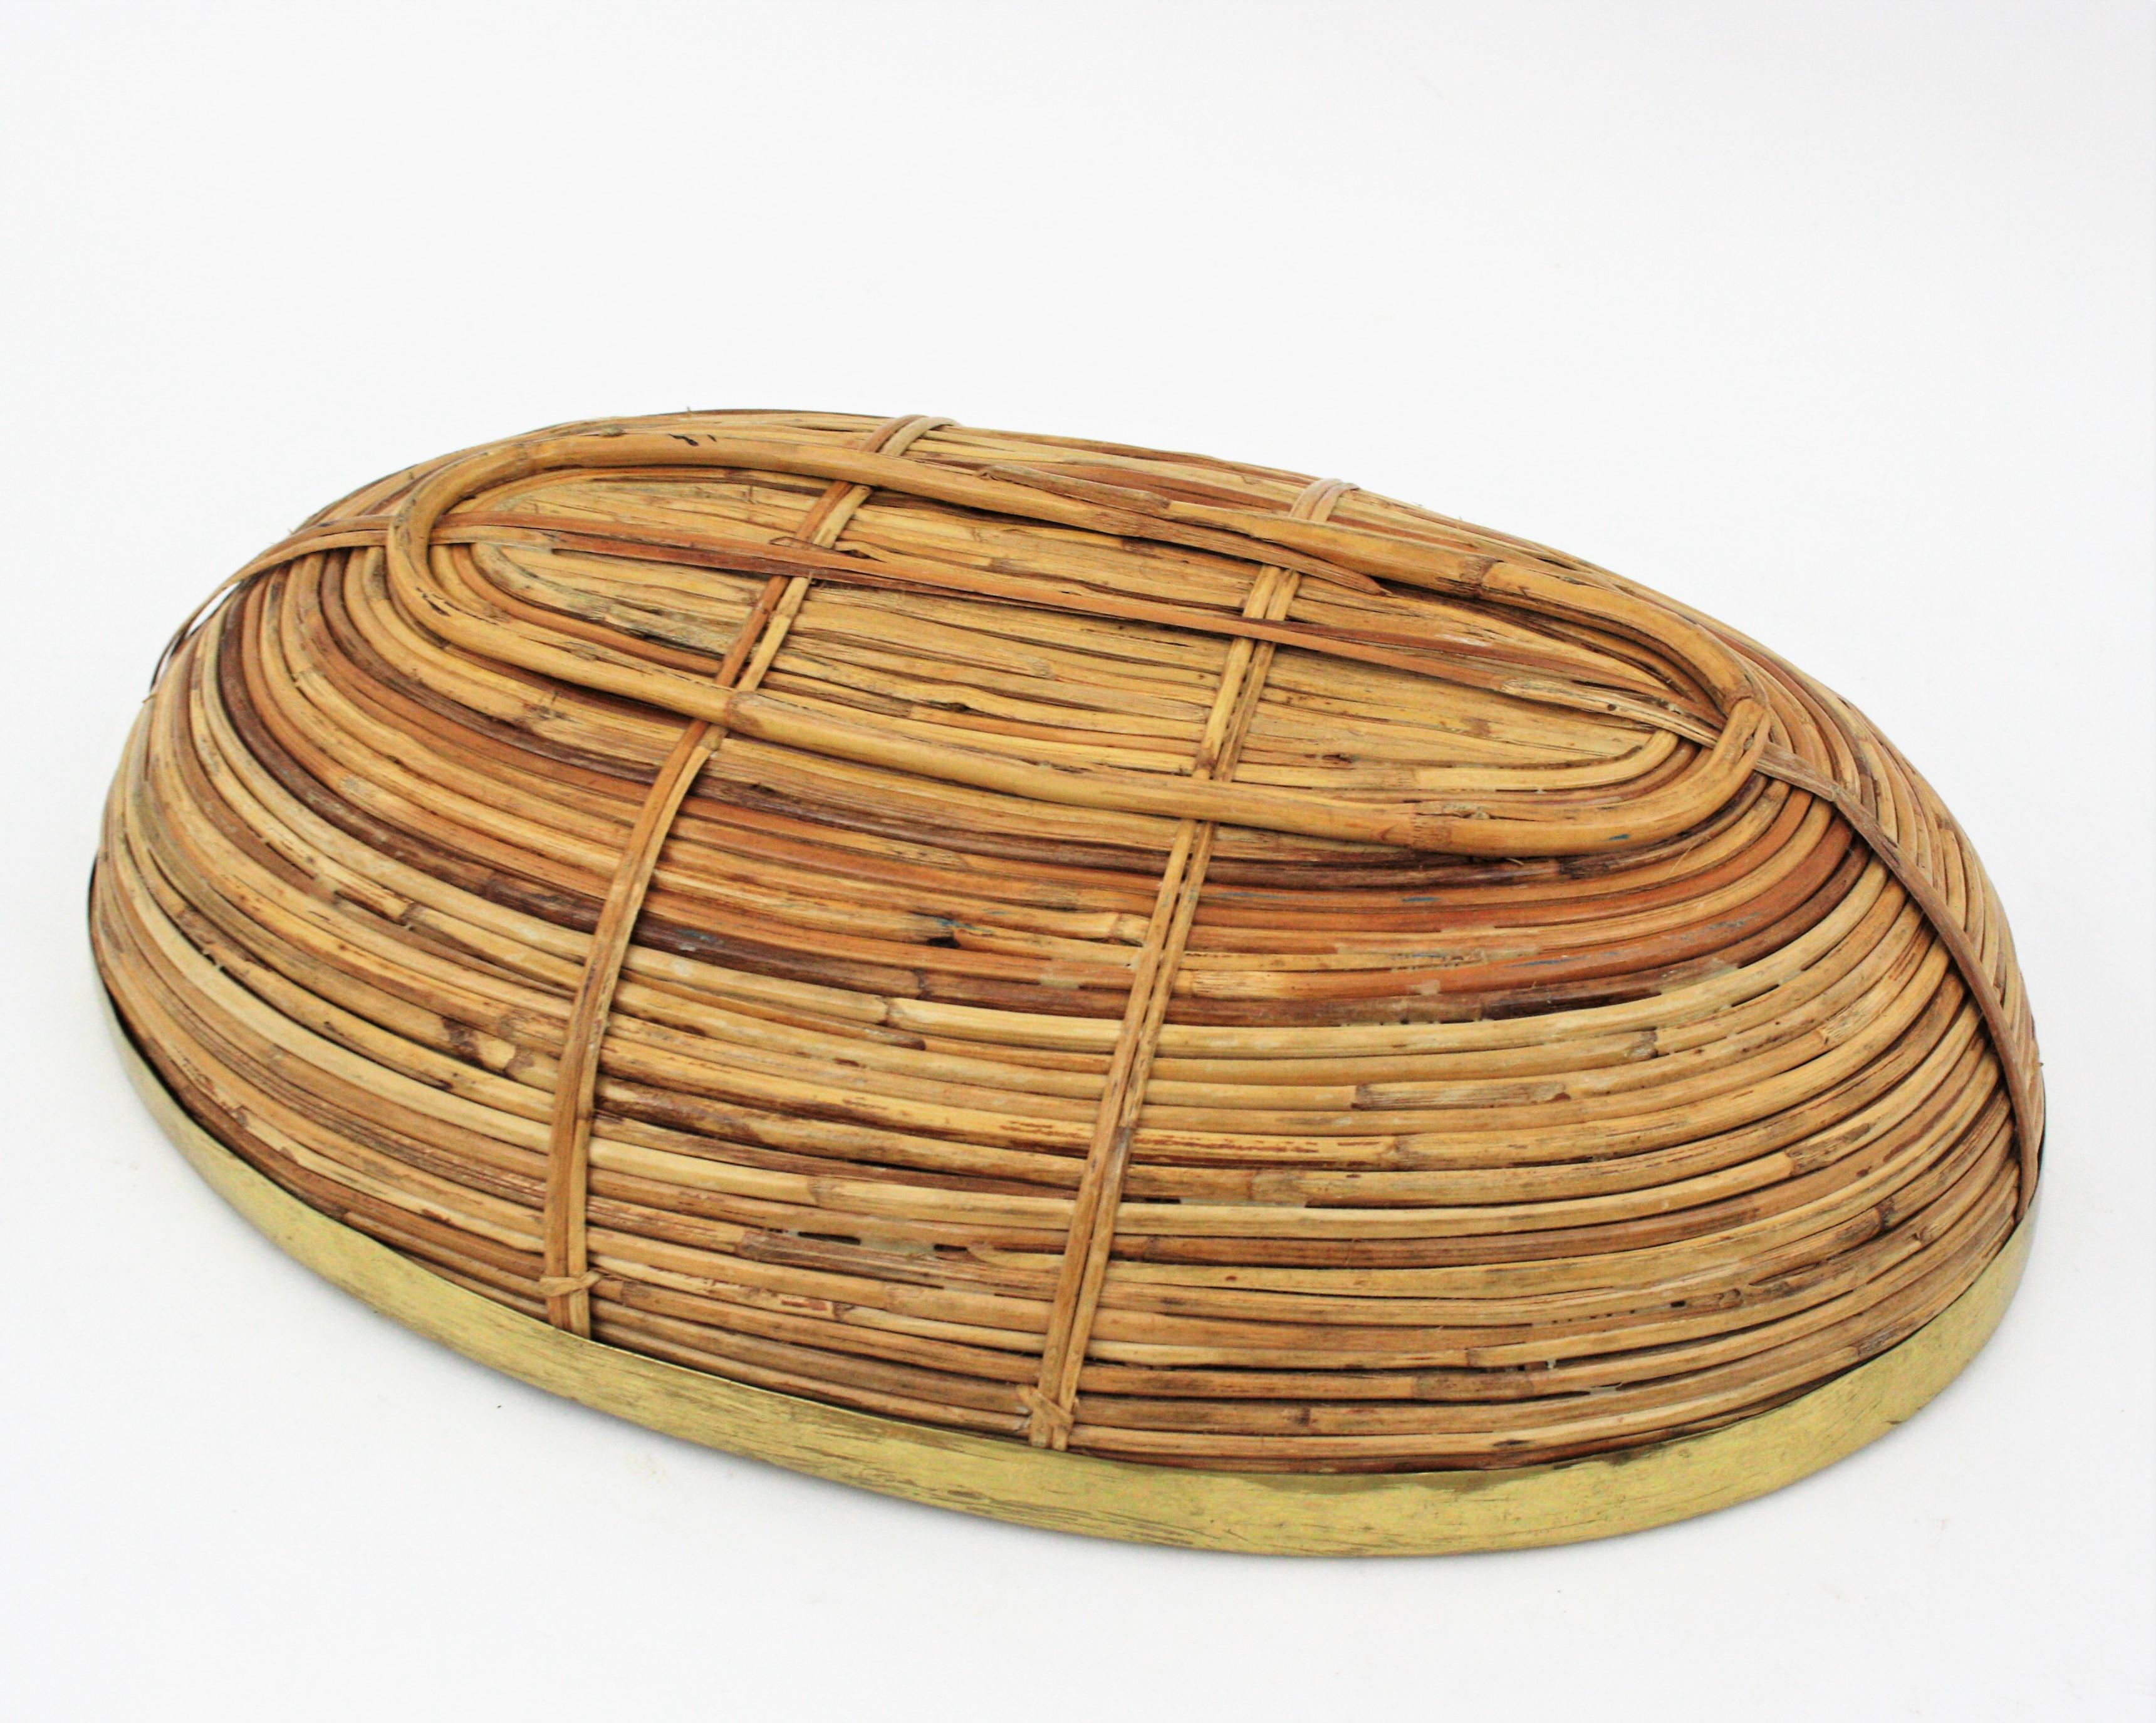 Rattan and Brass Italian Large Oval Basket Centerpiece Bowl, 1970s For Sale 11